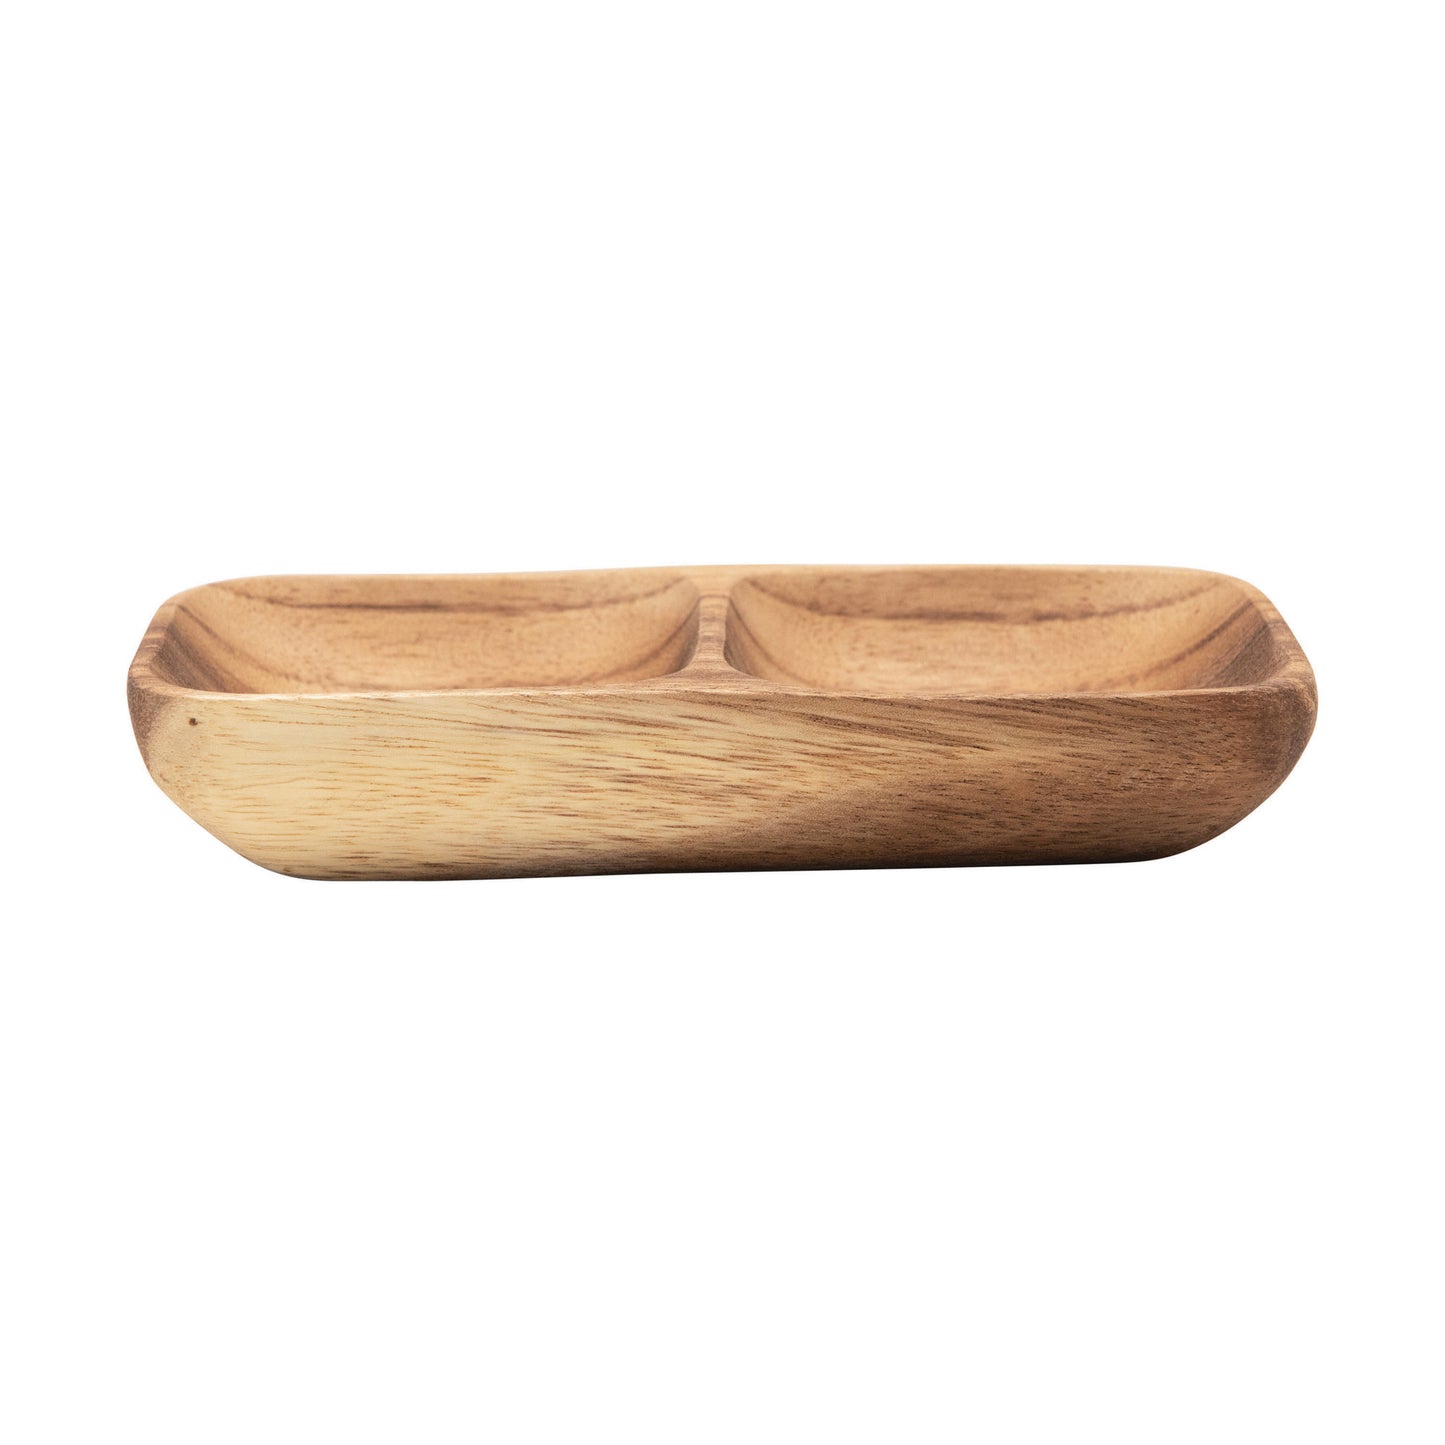 Acacia Wood Tray with 2 Sections